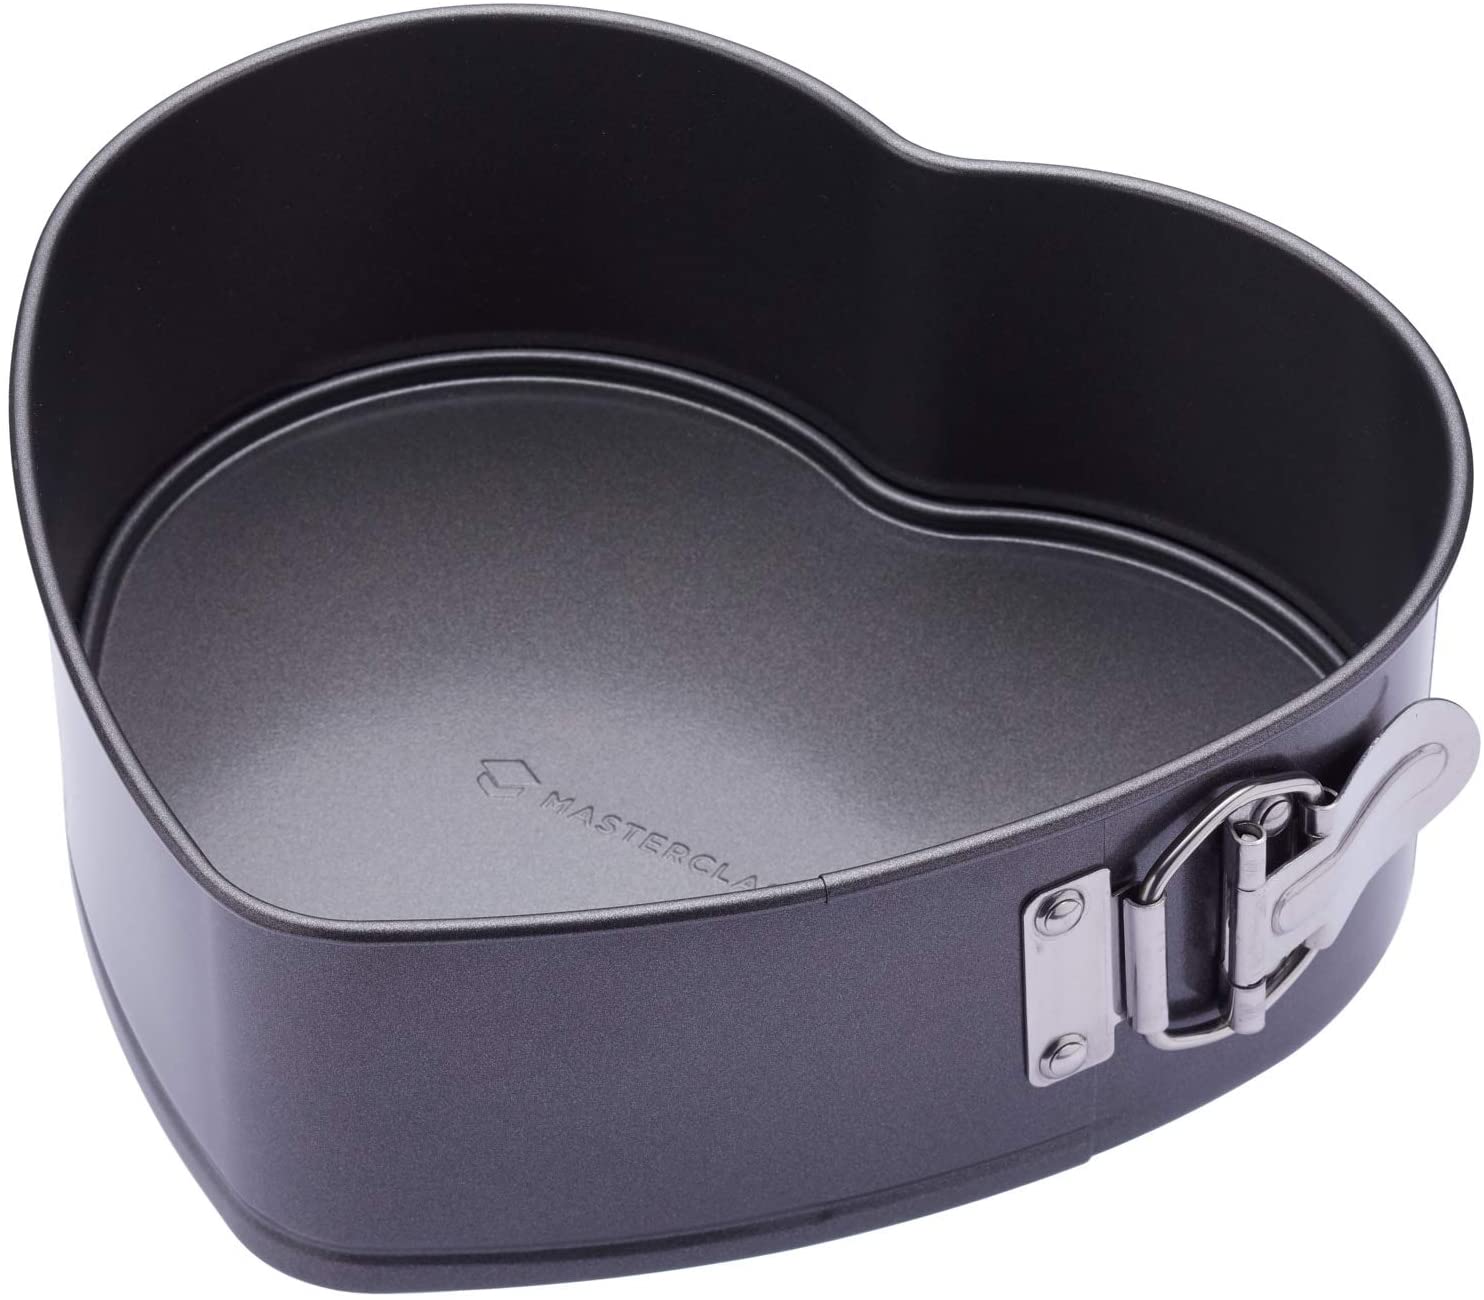 KitchenCraft MasterClass Deep Non-Stick Cake Baking Tin, Heart Shaped Springform Cake Tin Made of Carbon Steel with Cuff, Oven Baking Tin with Loose Base, Grey, Diameter 22.9 cm, 7.5 cm Deep